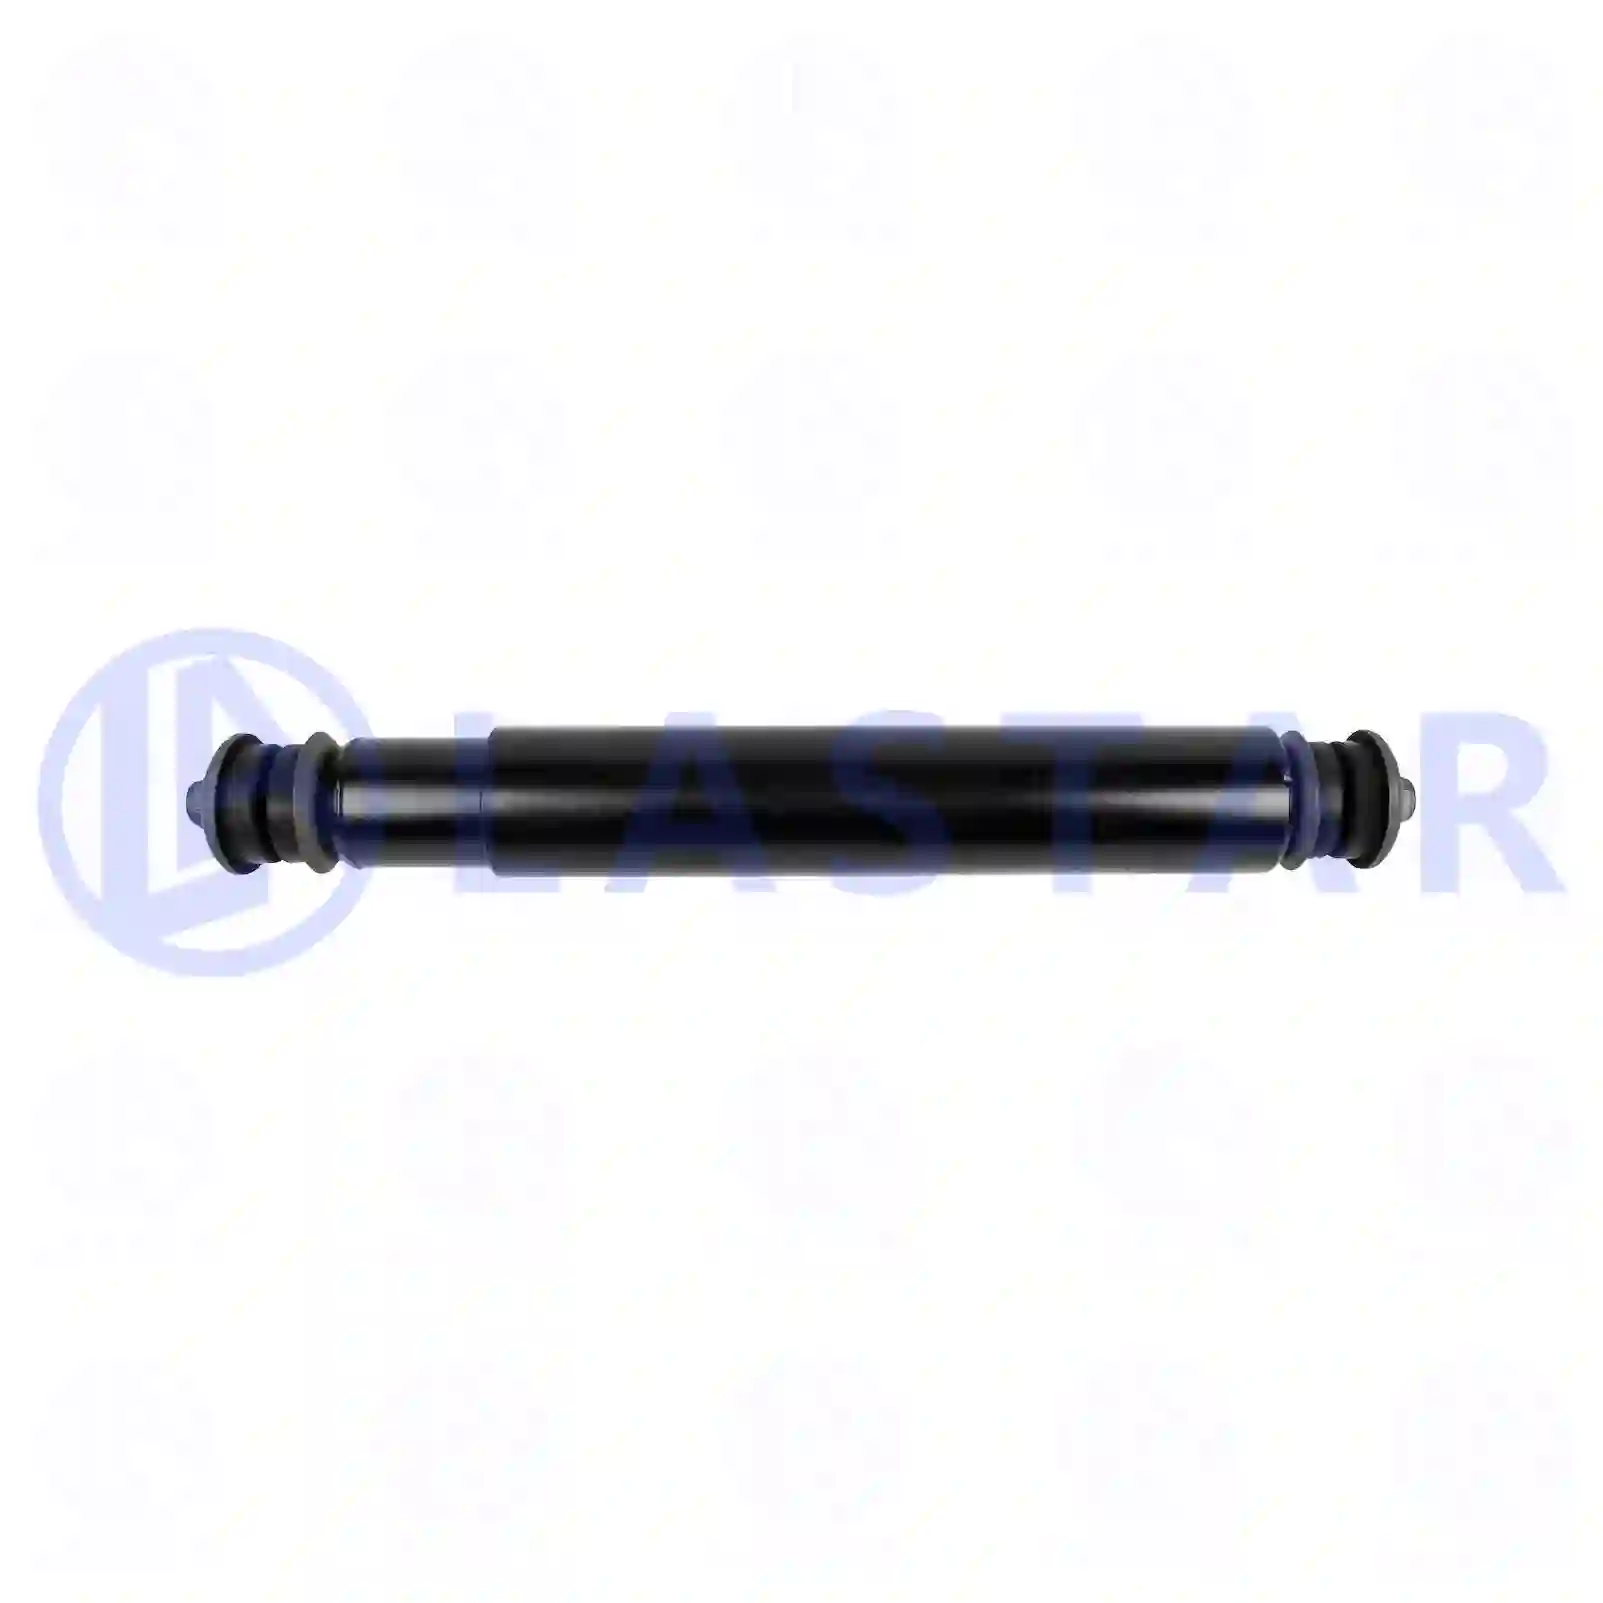 Shock absorber, 77727492, 0379131, 1283729, 379131, , ||  77727492 Lastar Spare Part | Truck Spare Parts, Auotomotive Spare Parts Shock absorber, 77727492, 0379131, 1283729, 379131, , ||  77727492 Lastar Spare Part | Truck Spare Parts, Auotomotive Spare Parts